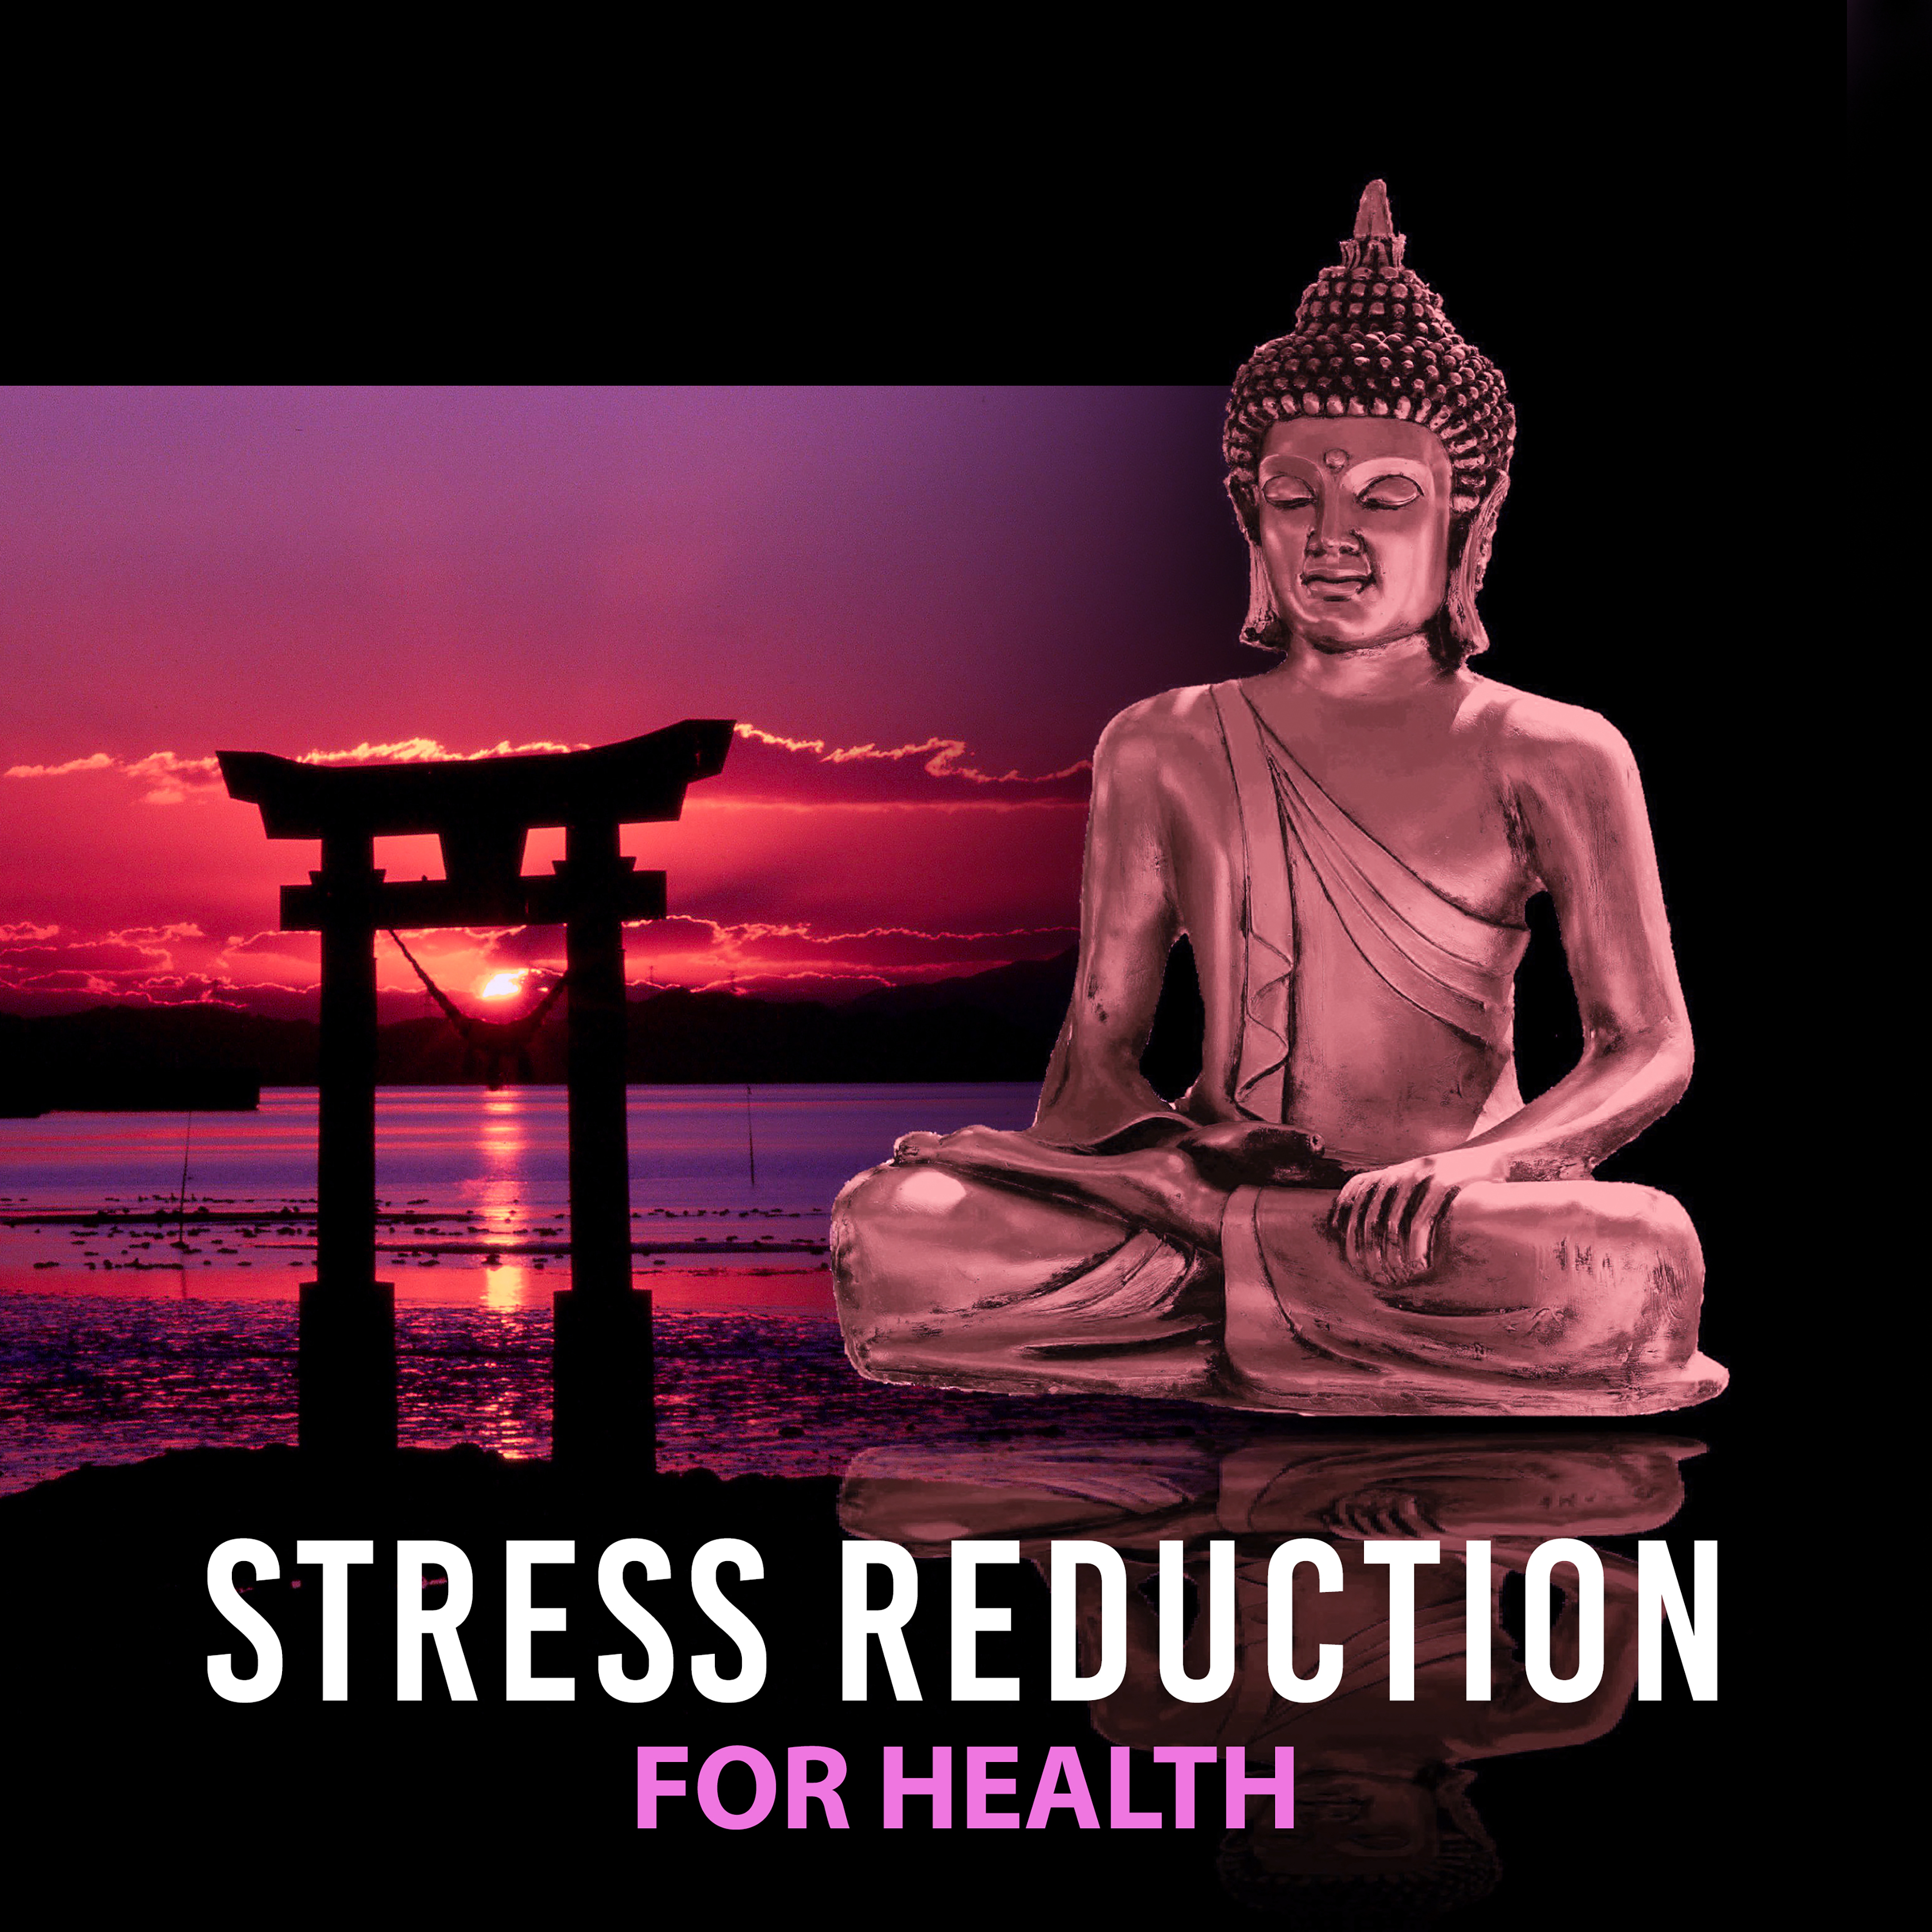 Stress Reduction for Health  Calm Meditation, Chakra Healing, Deep Focus, Restful Music, Harmony  Calmness, Relaxation Sounds